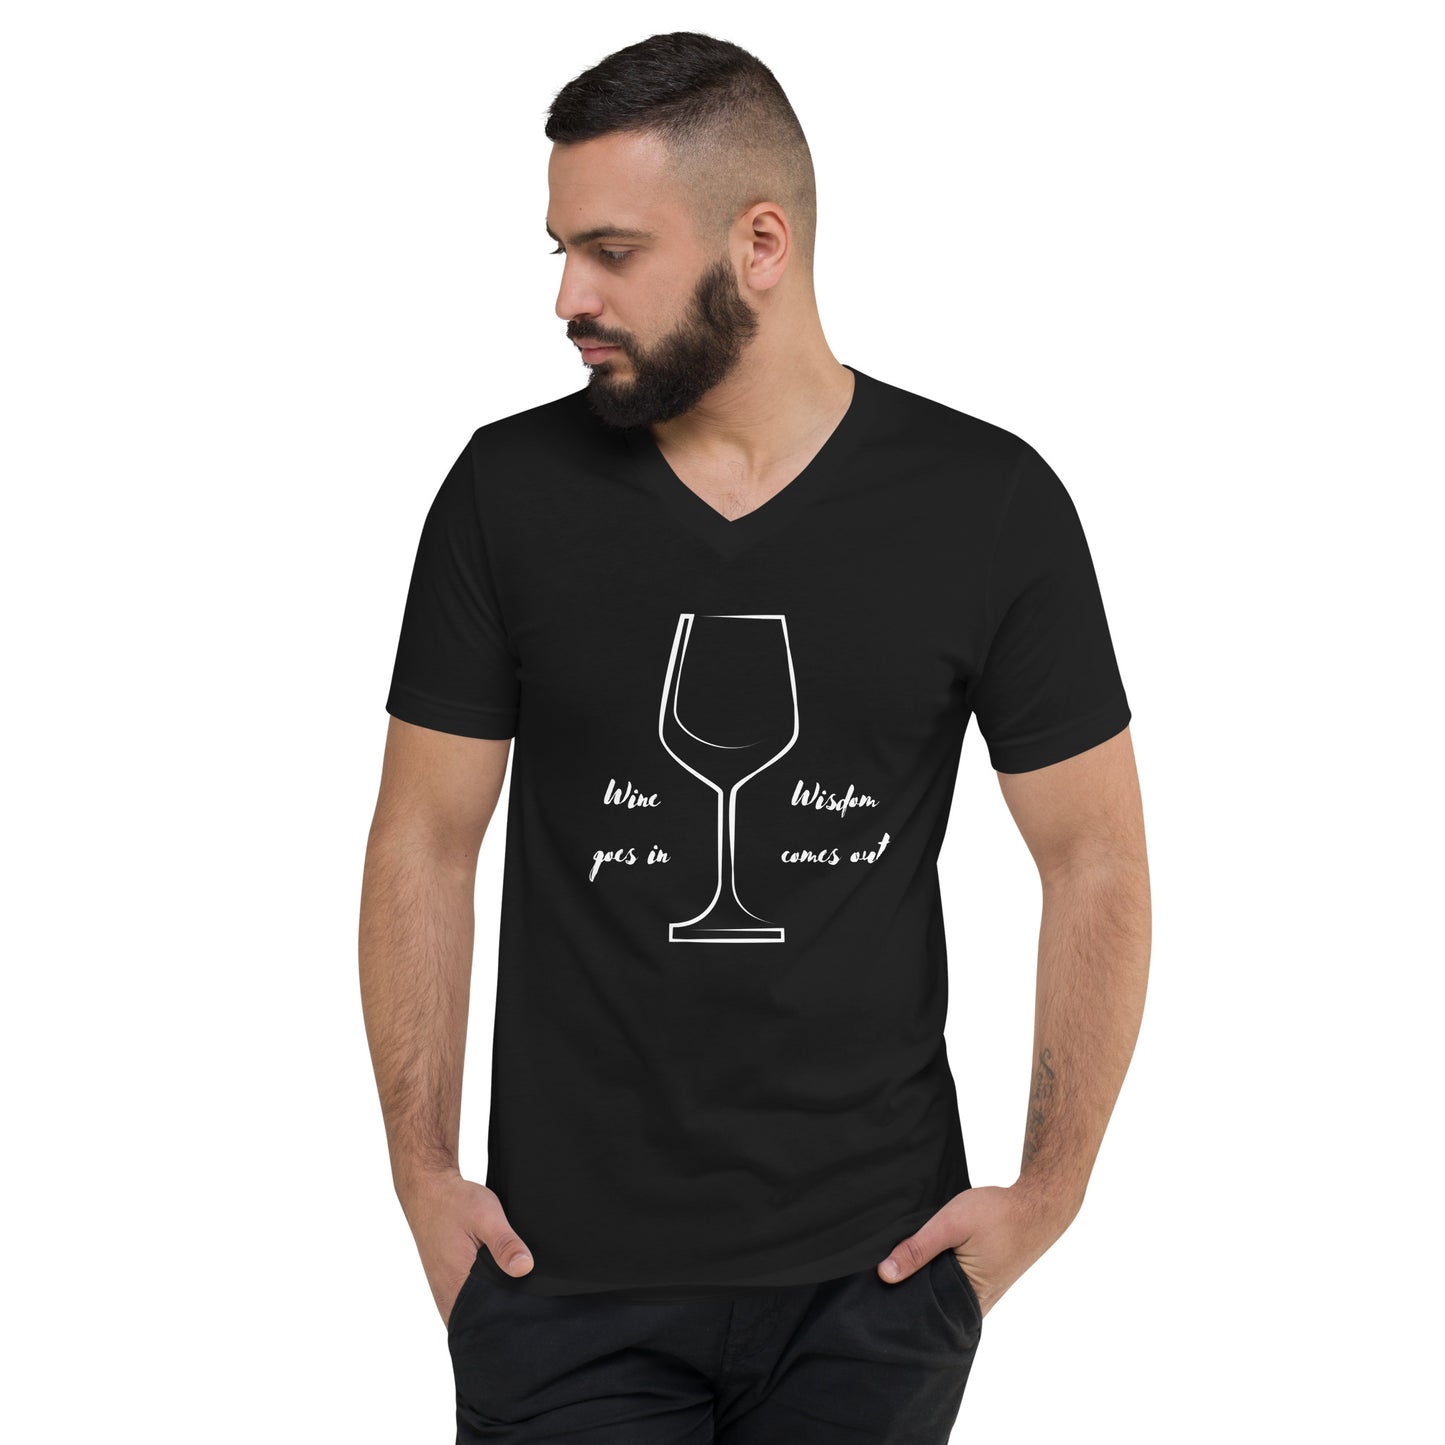 Wine goes in Wisdom comes out - Black Short Sleeve Tee